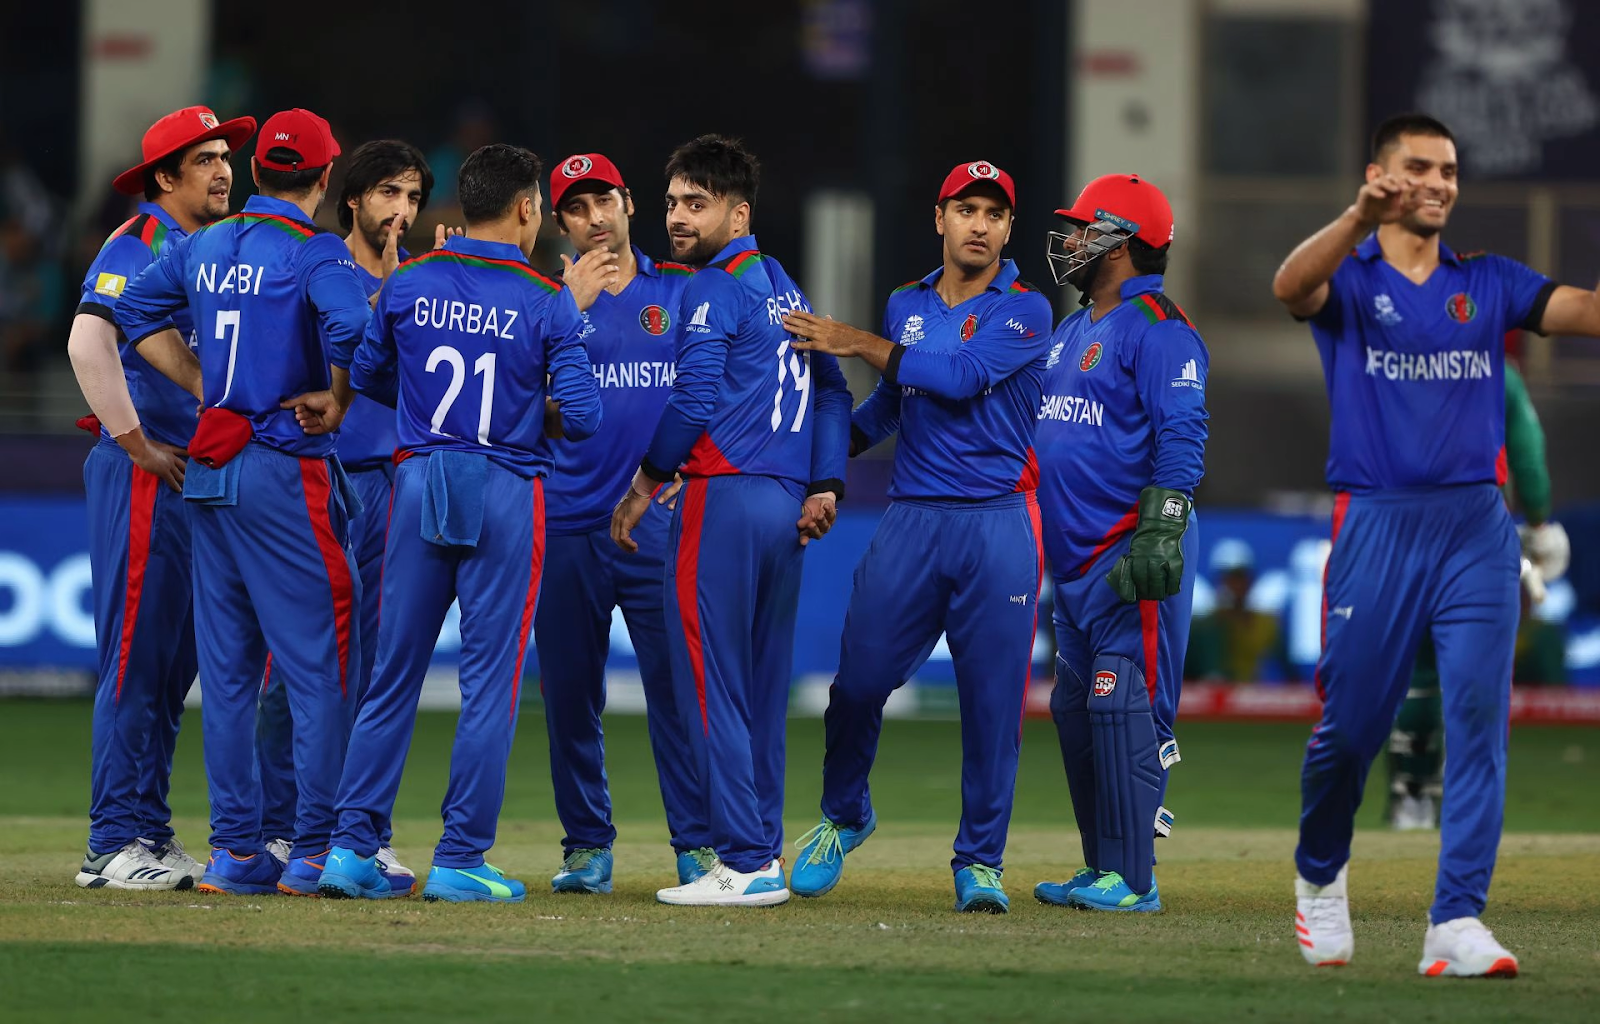 Asia Cup 2022 First Match, Sri Lanka vs. Afghanistan: Dubai International Cricket Stadium Pitch Report and Weather Forecast